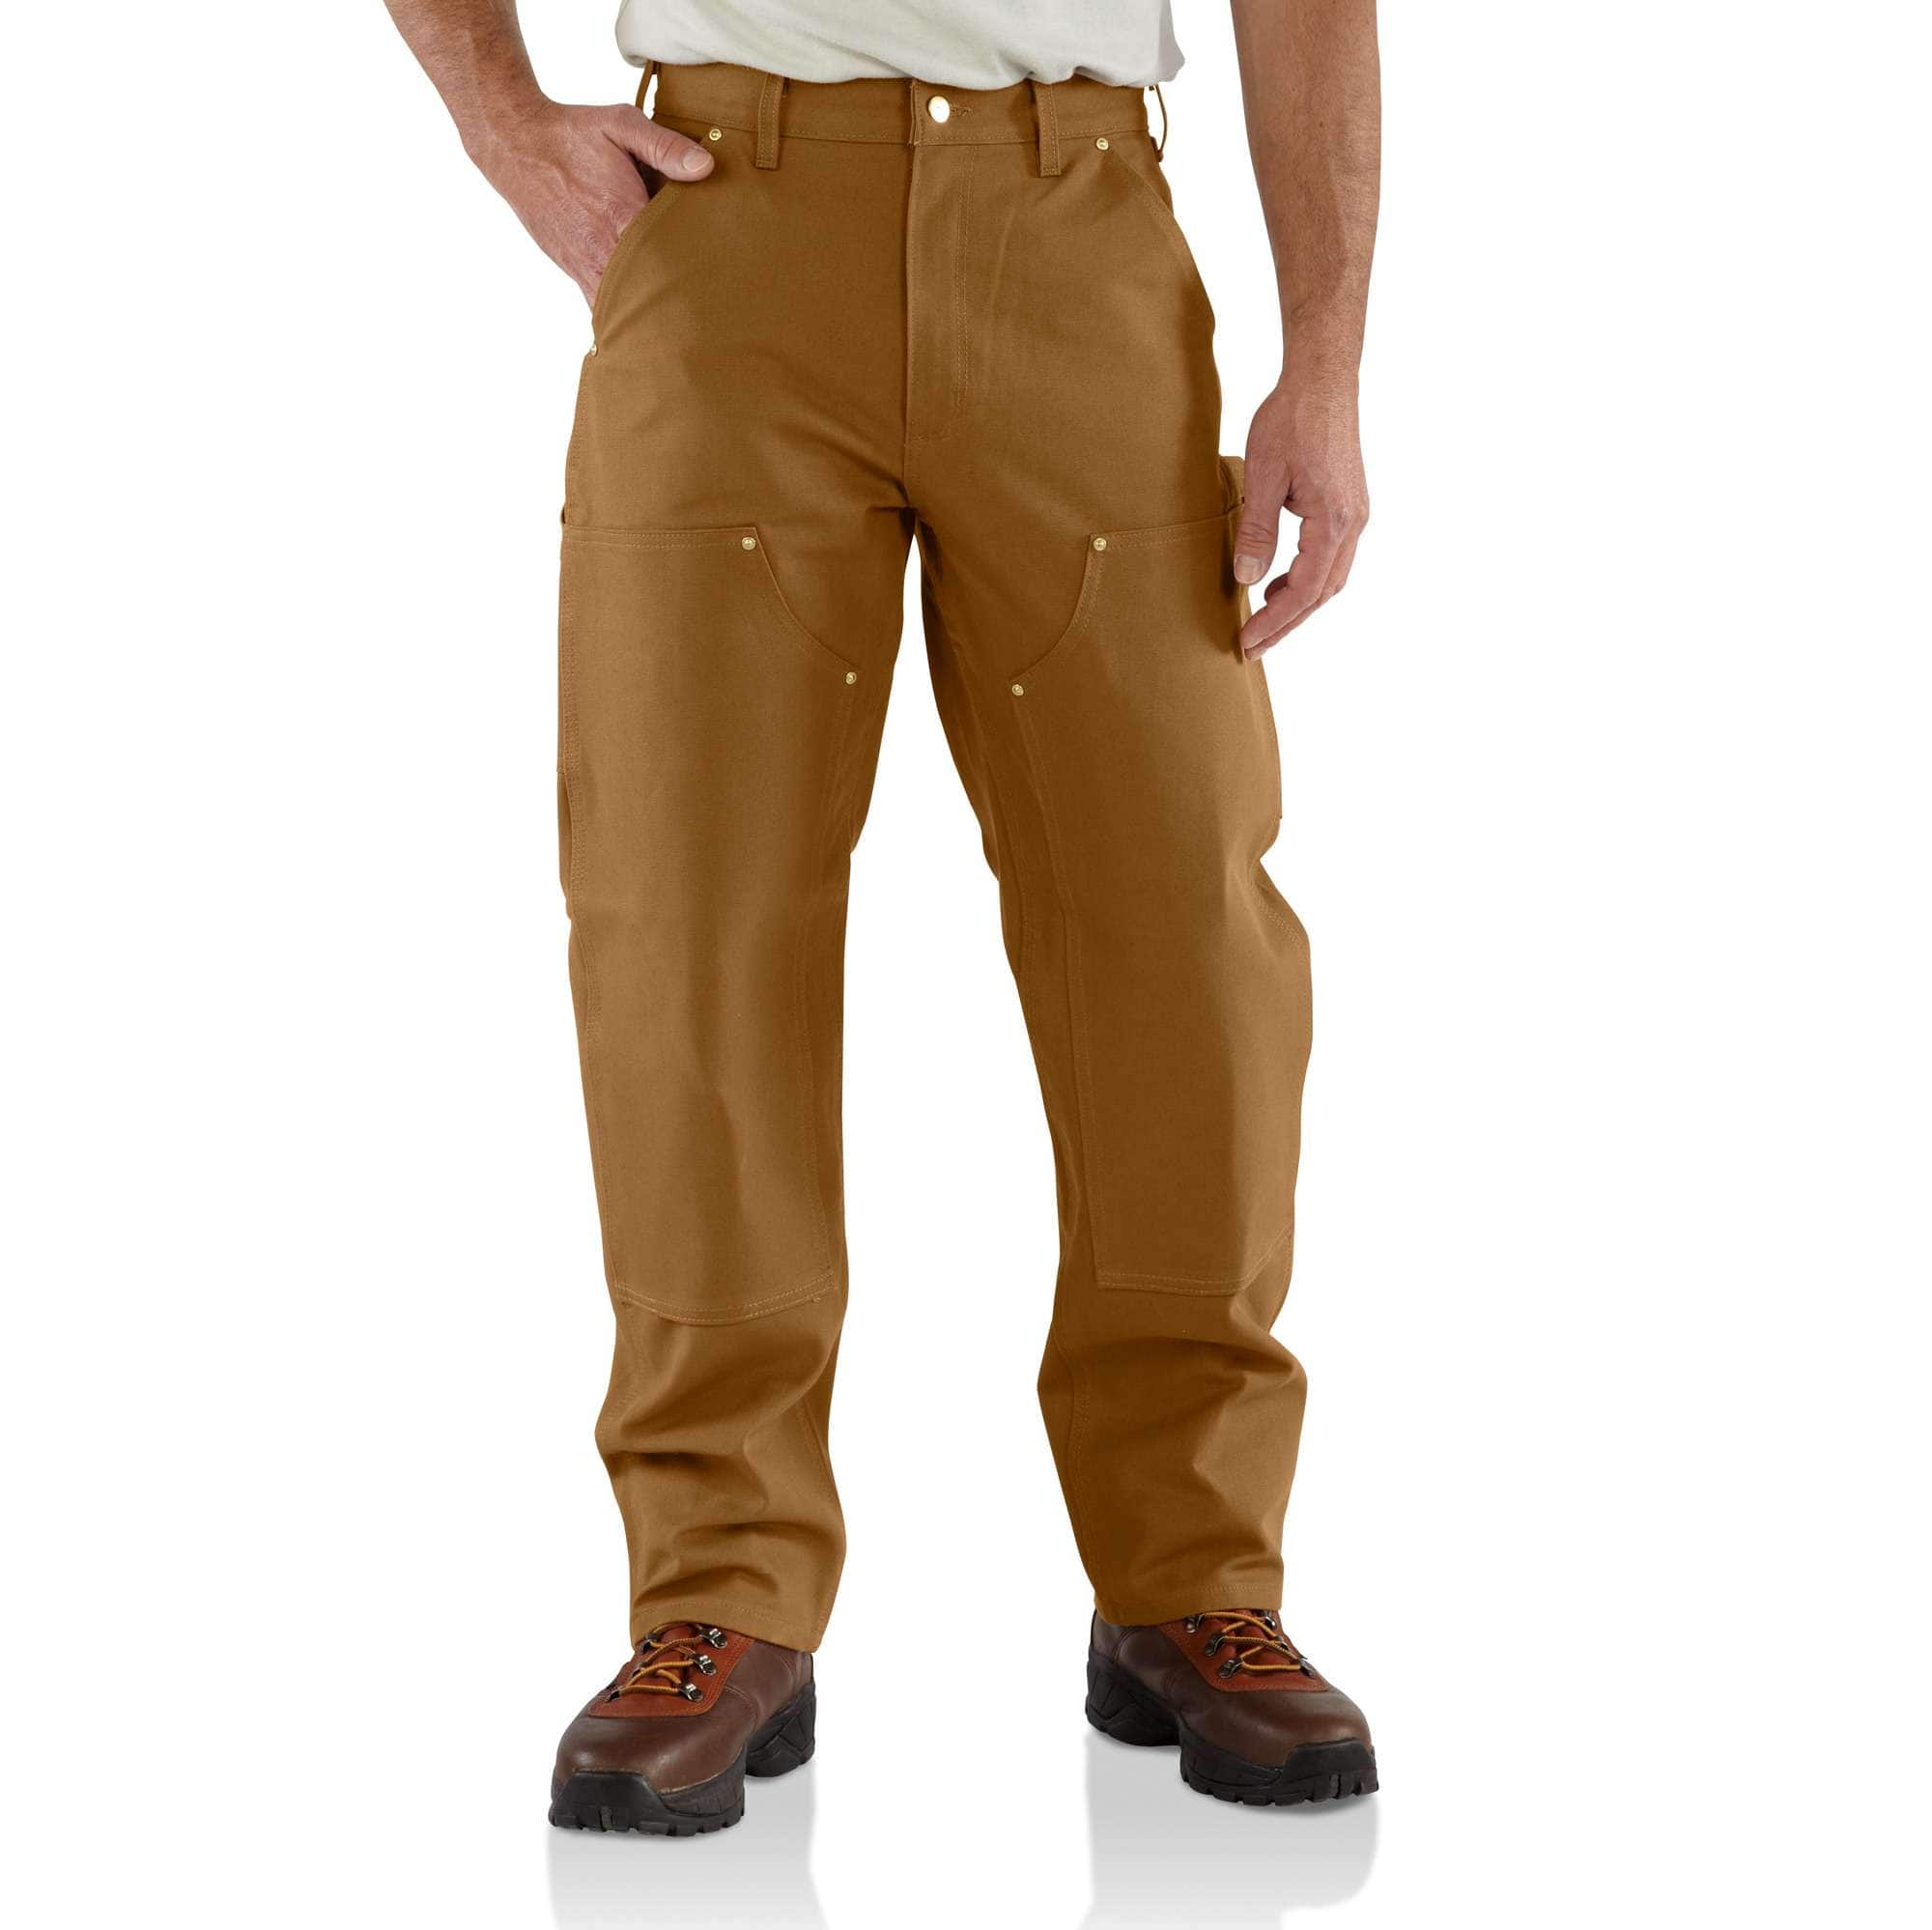 Men's Utility Double-Knee Pant - Loose Fit - Firm Duck, Coming Soon